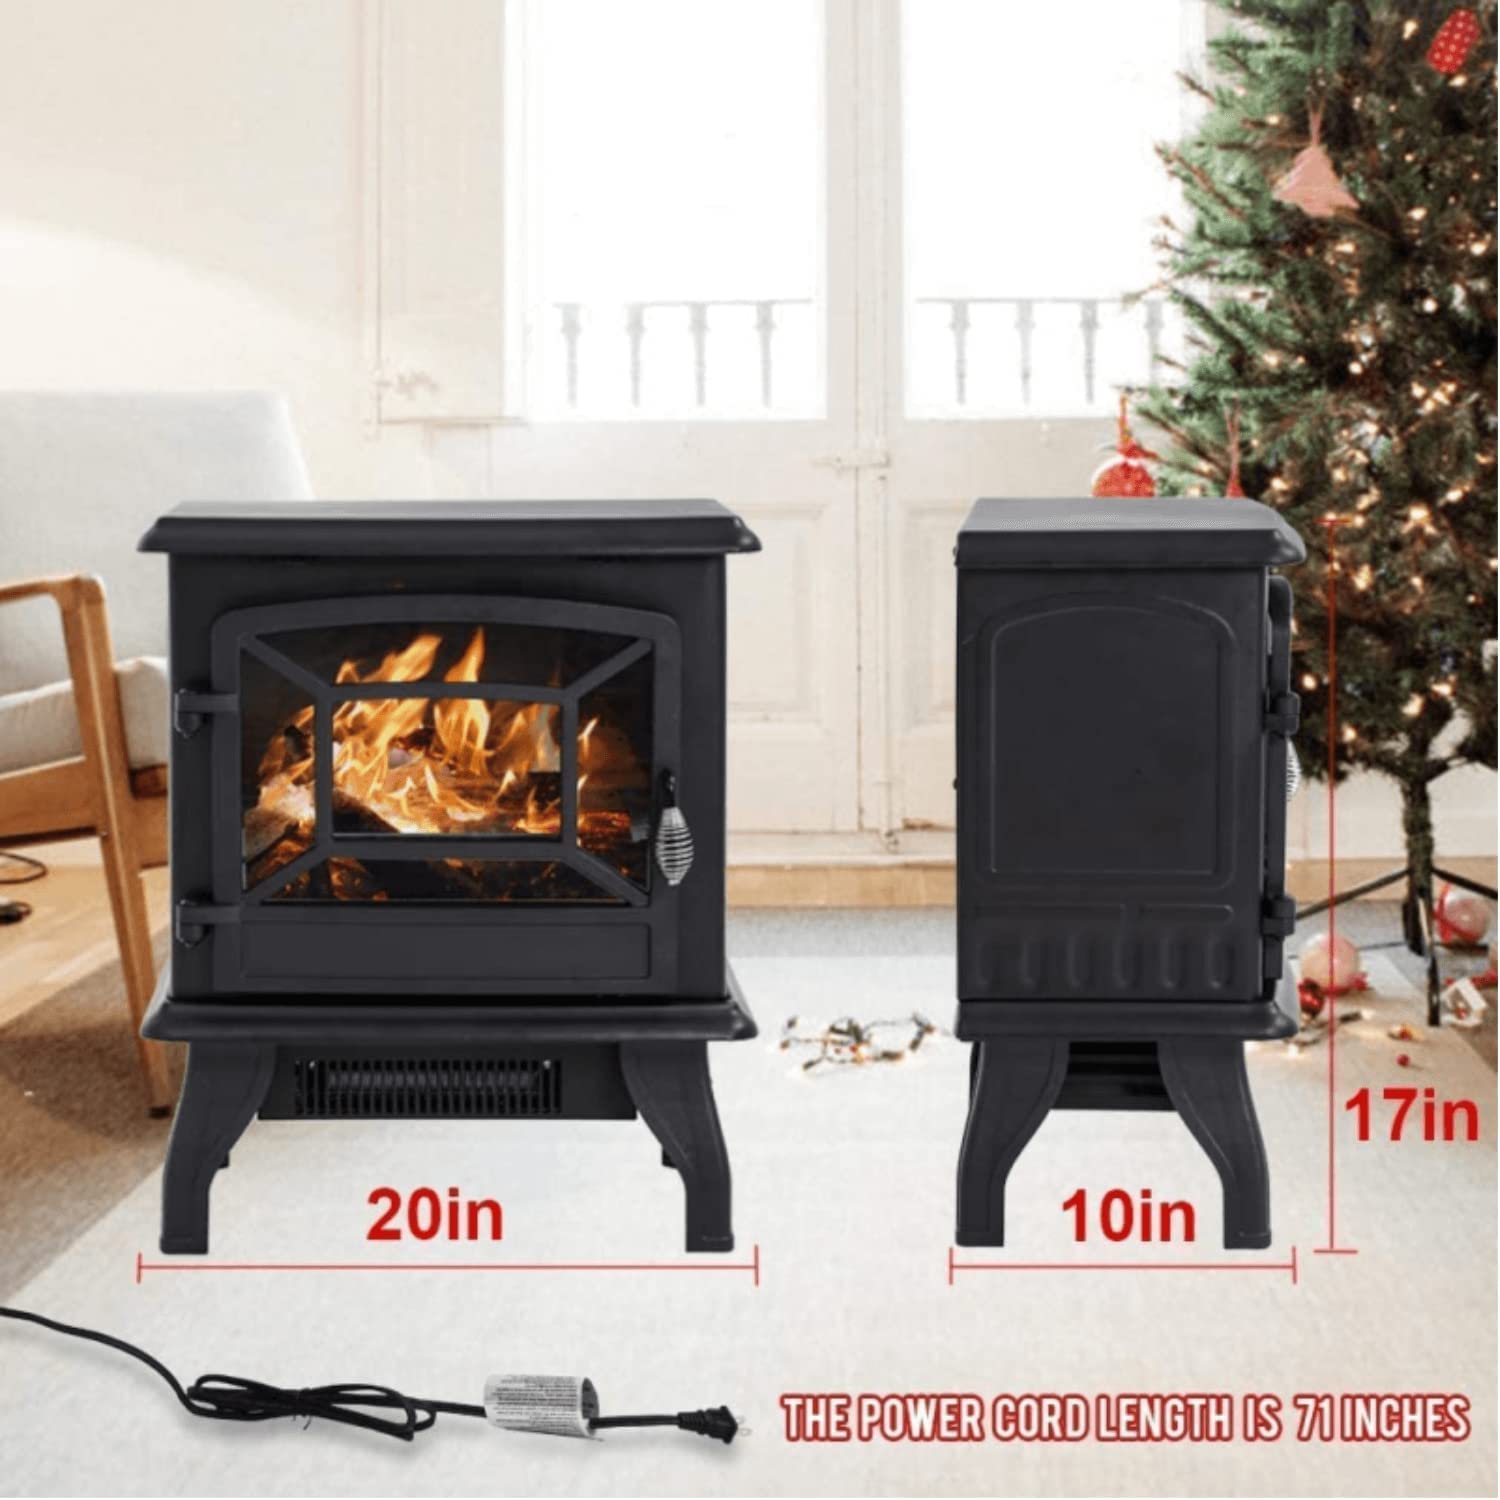 Electric Fireplace Heater Stove 20" Freestanding Stove Heater 1400W/4780BTU Indoor Small LED Heater for Home Office,Overheating Safety Protection,Realistic Flame Effect,Black